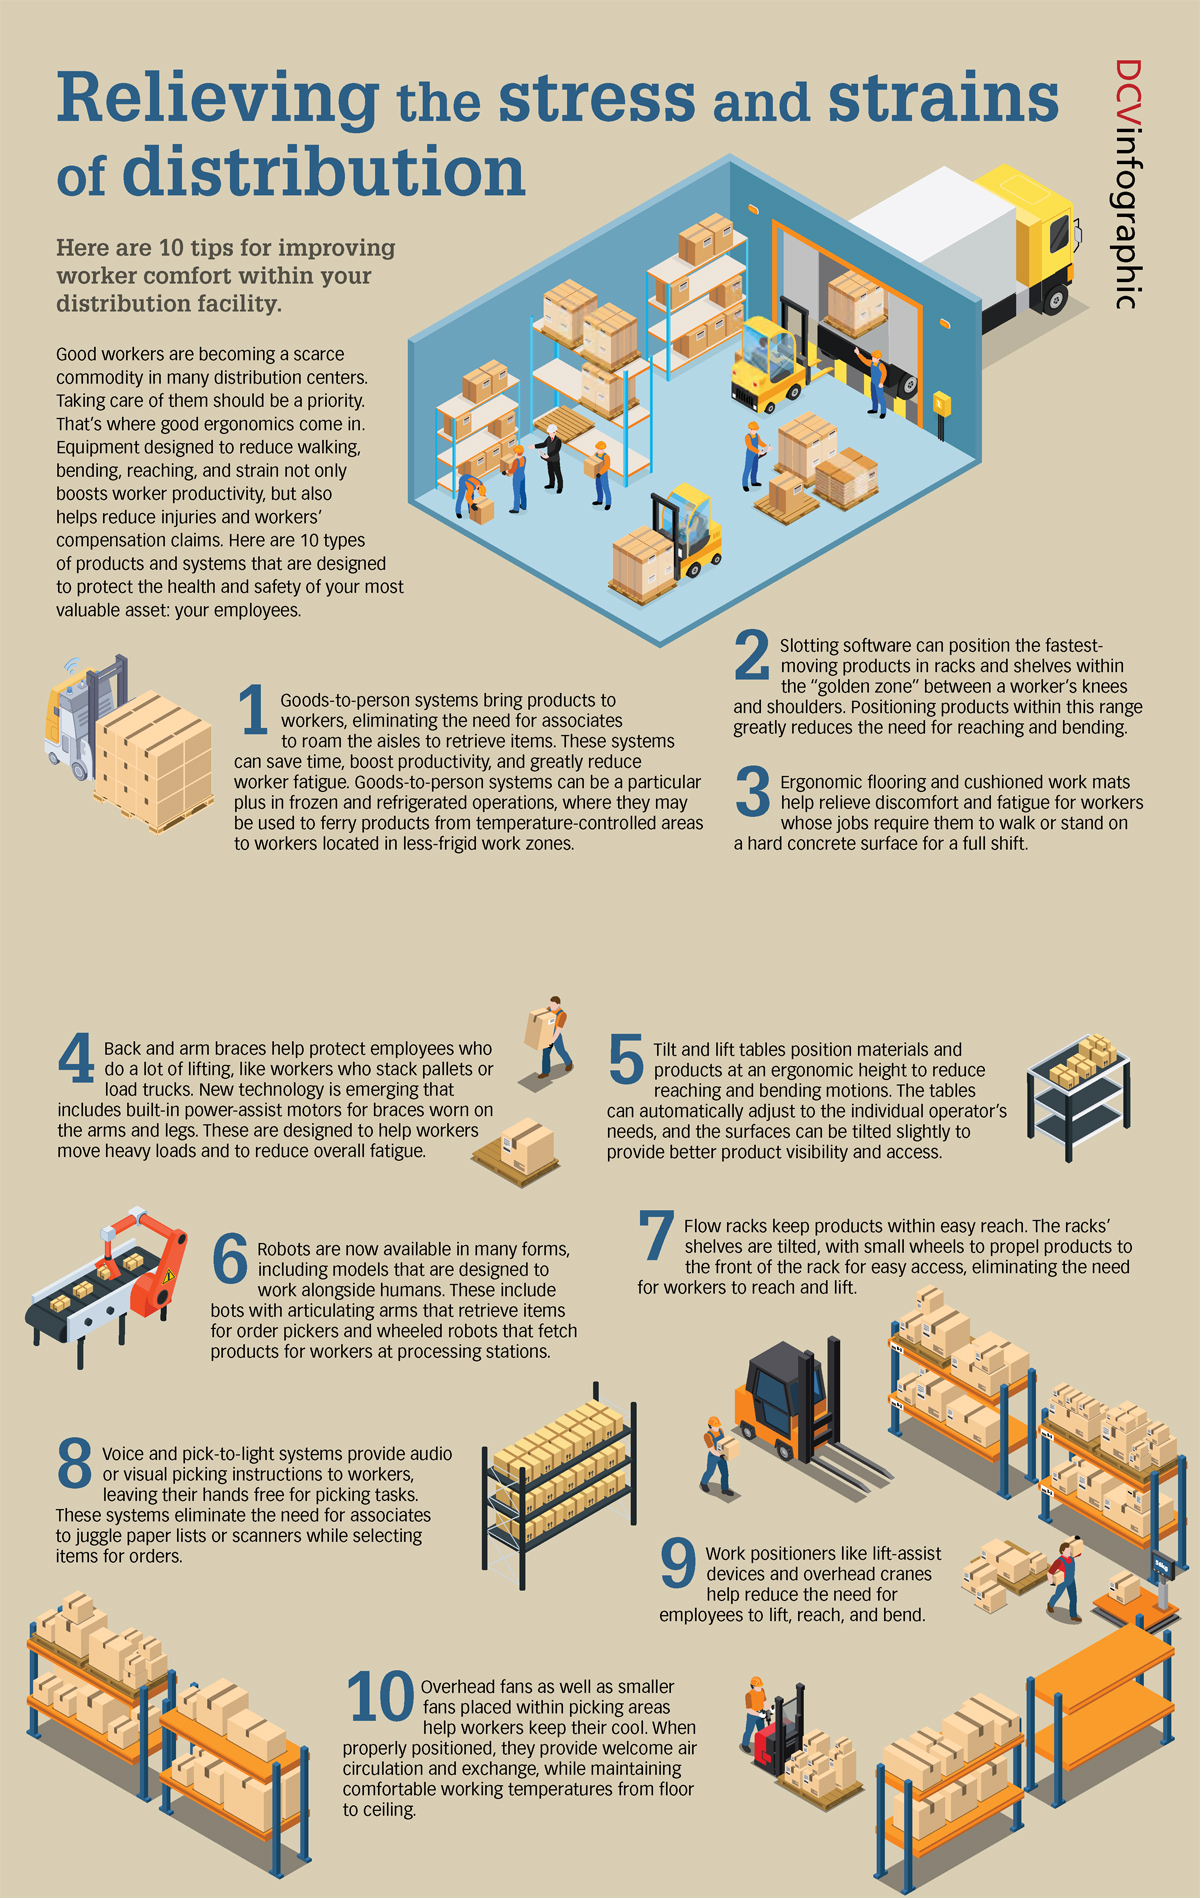 Here are 10 tips for improving worker comfort within your distribution facility.